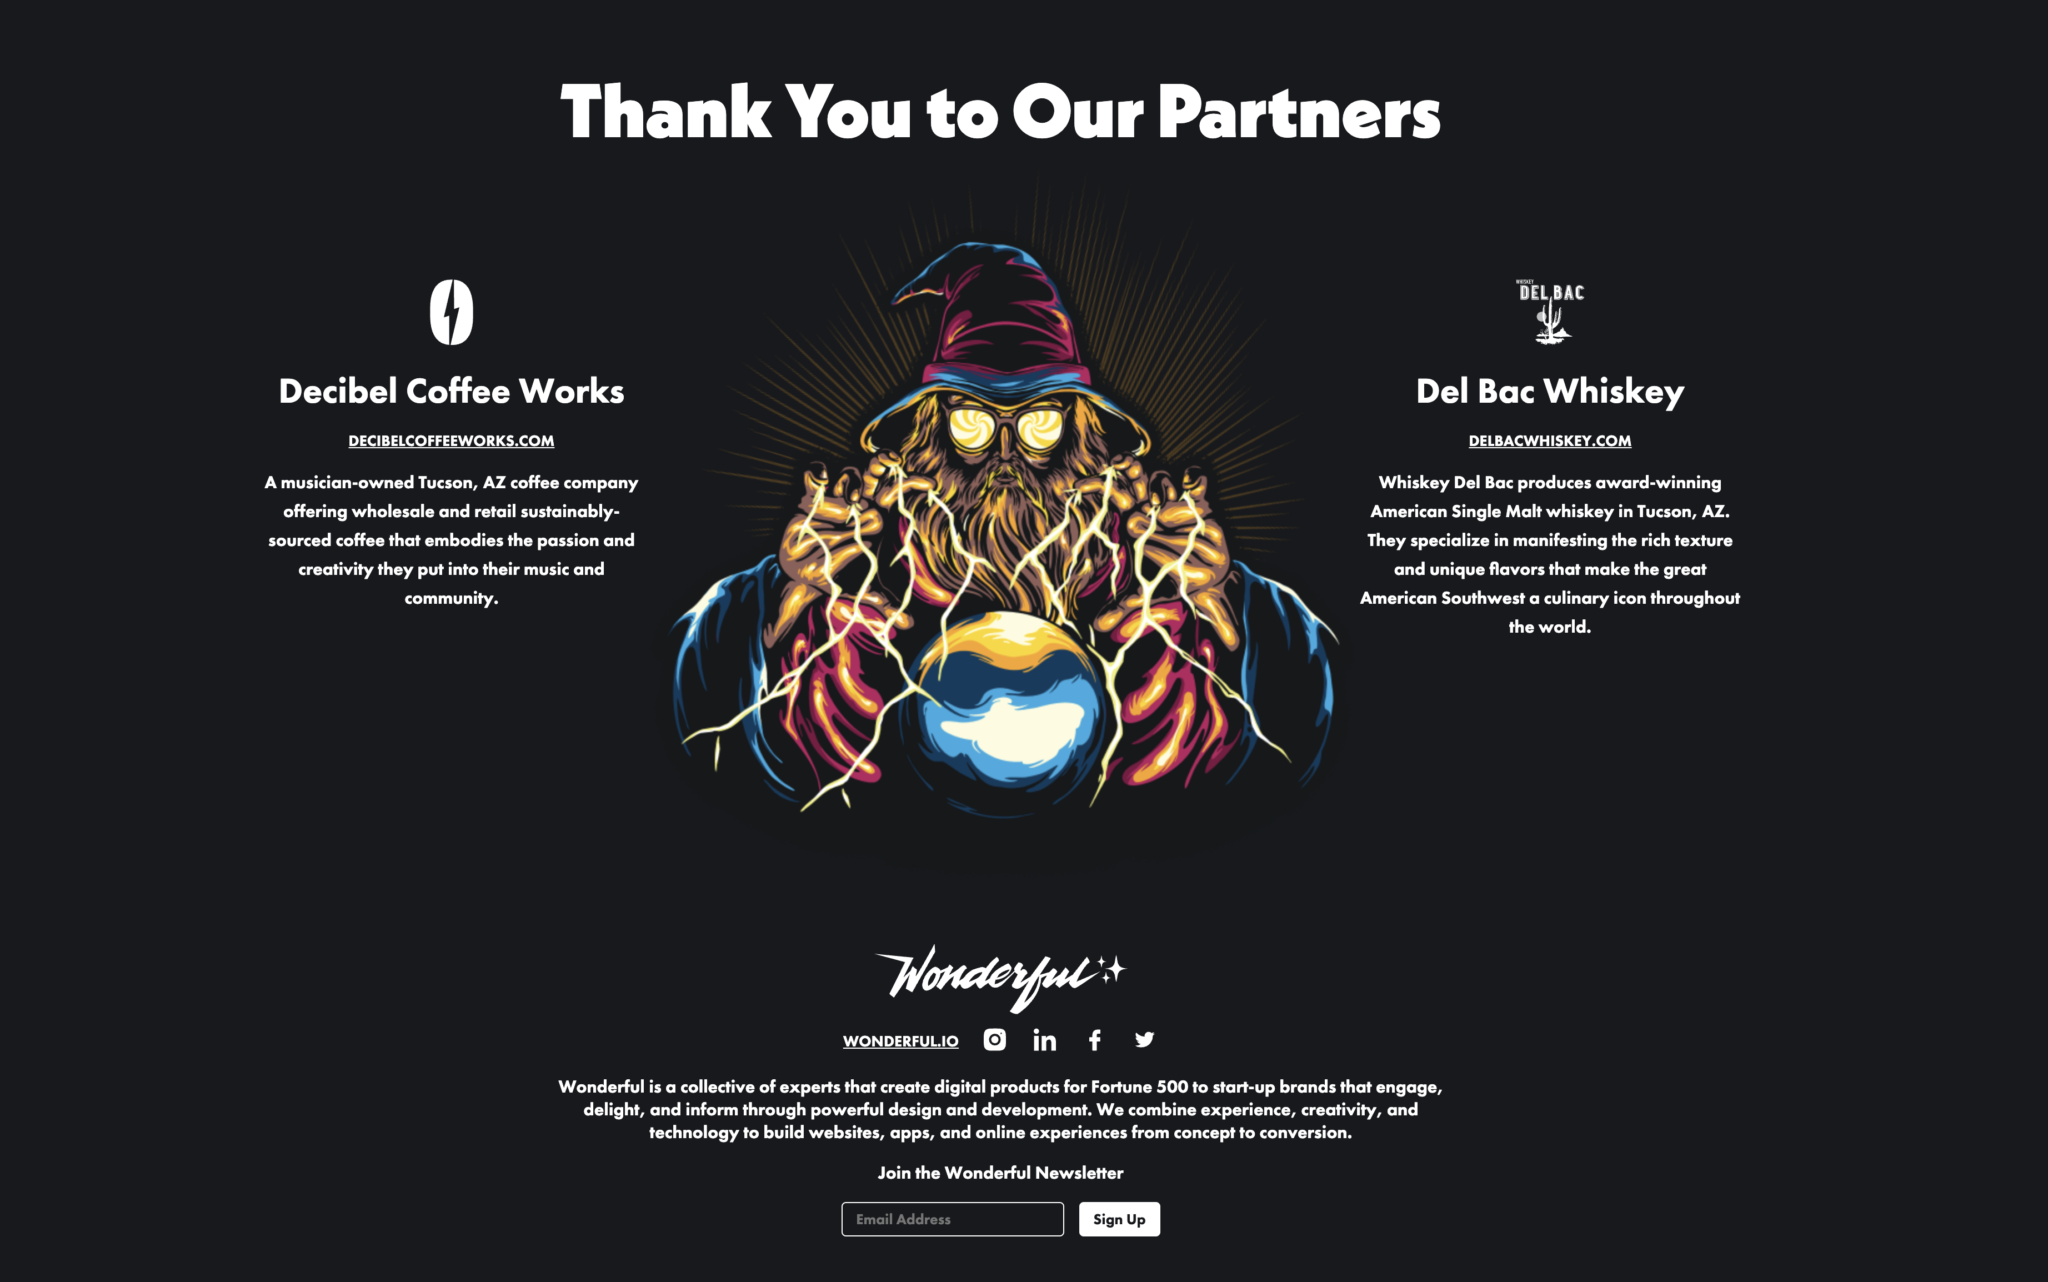 https://blog.wonderful.io/wp-content/uploads/2022/04/Second-Sight-Landing-Page-Footer-and-Partners--1024x641.png